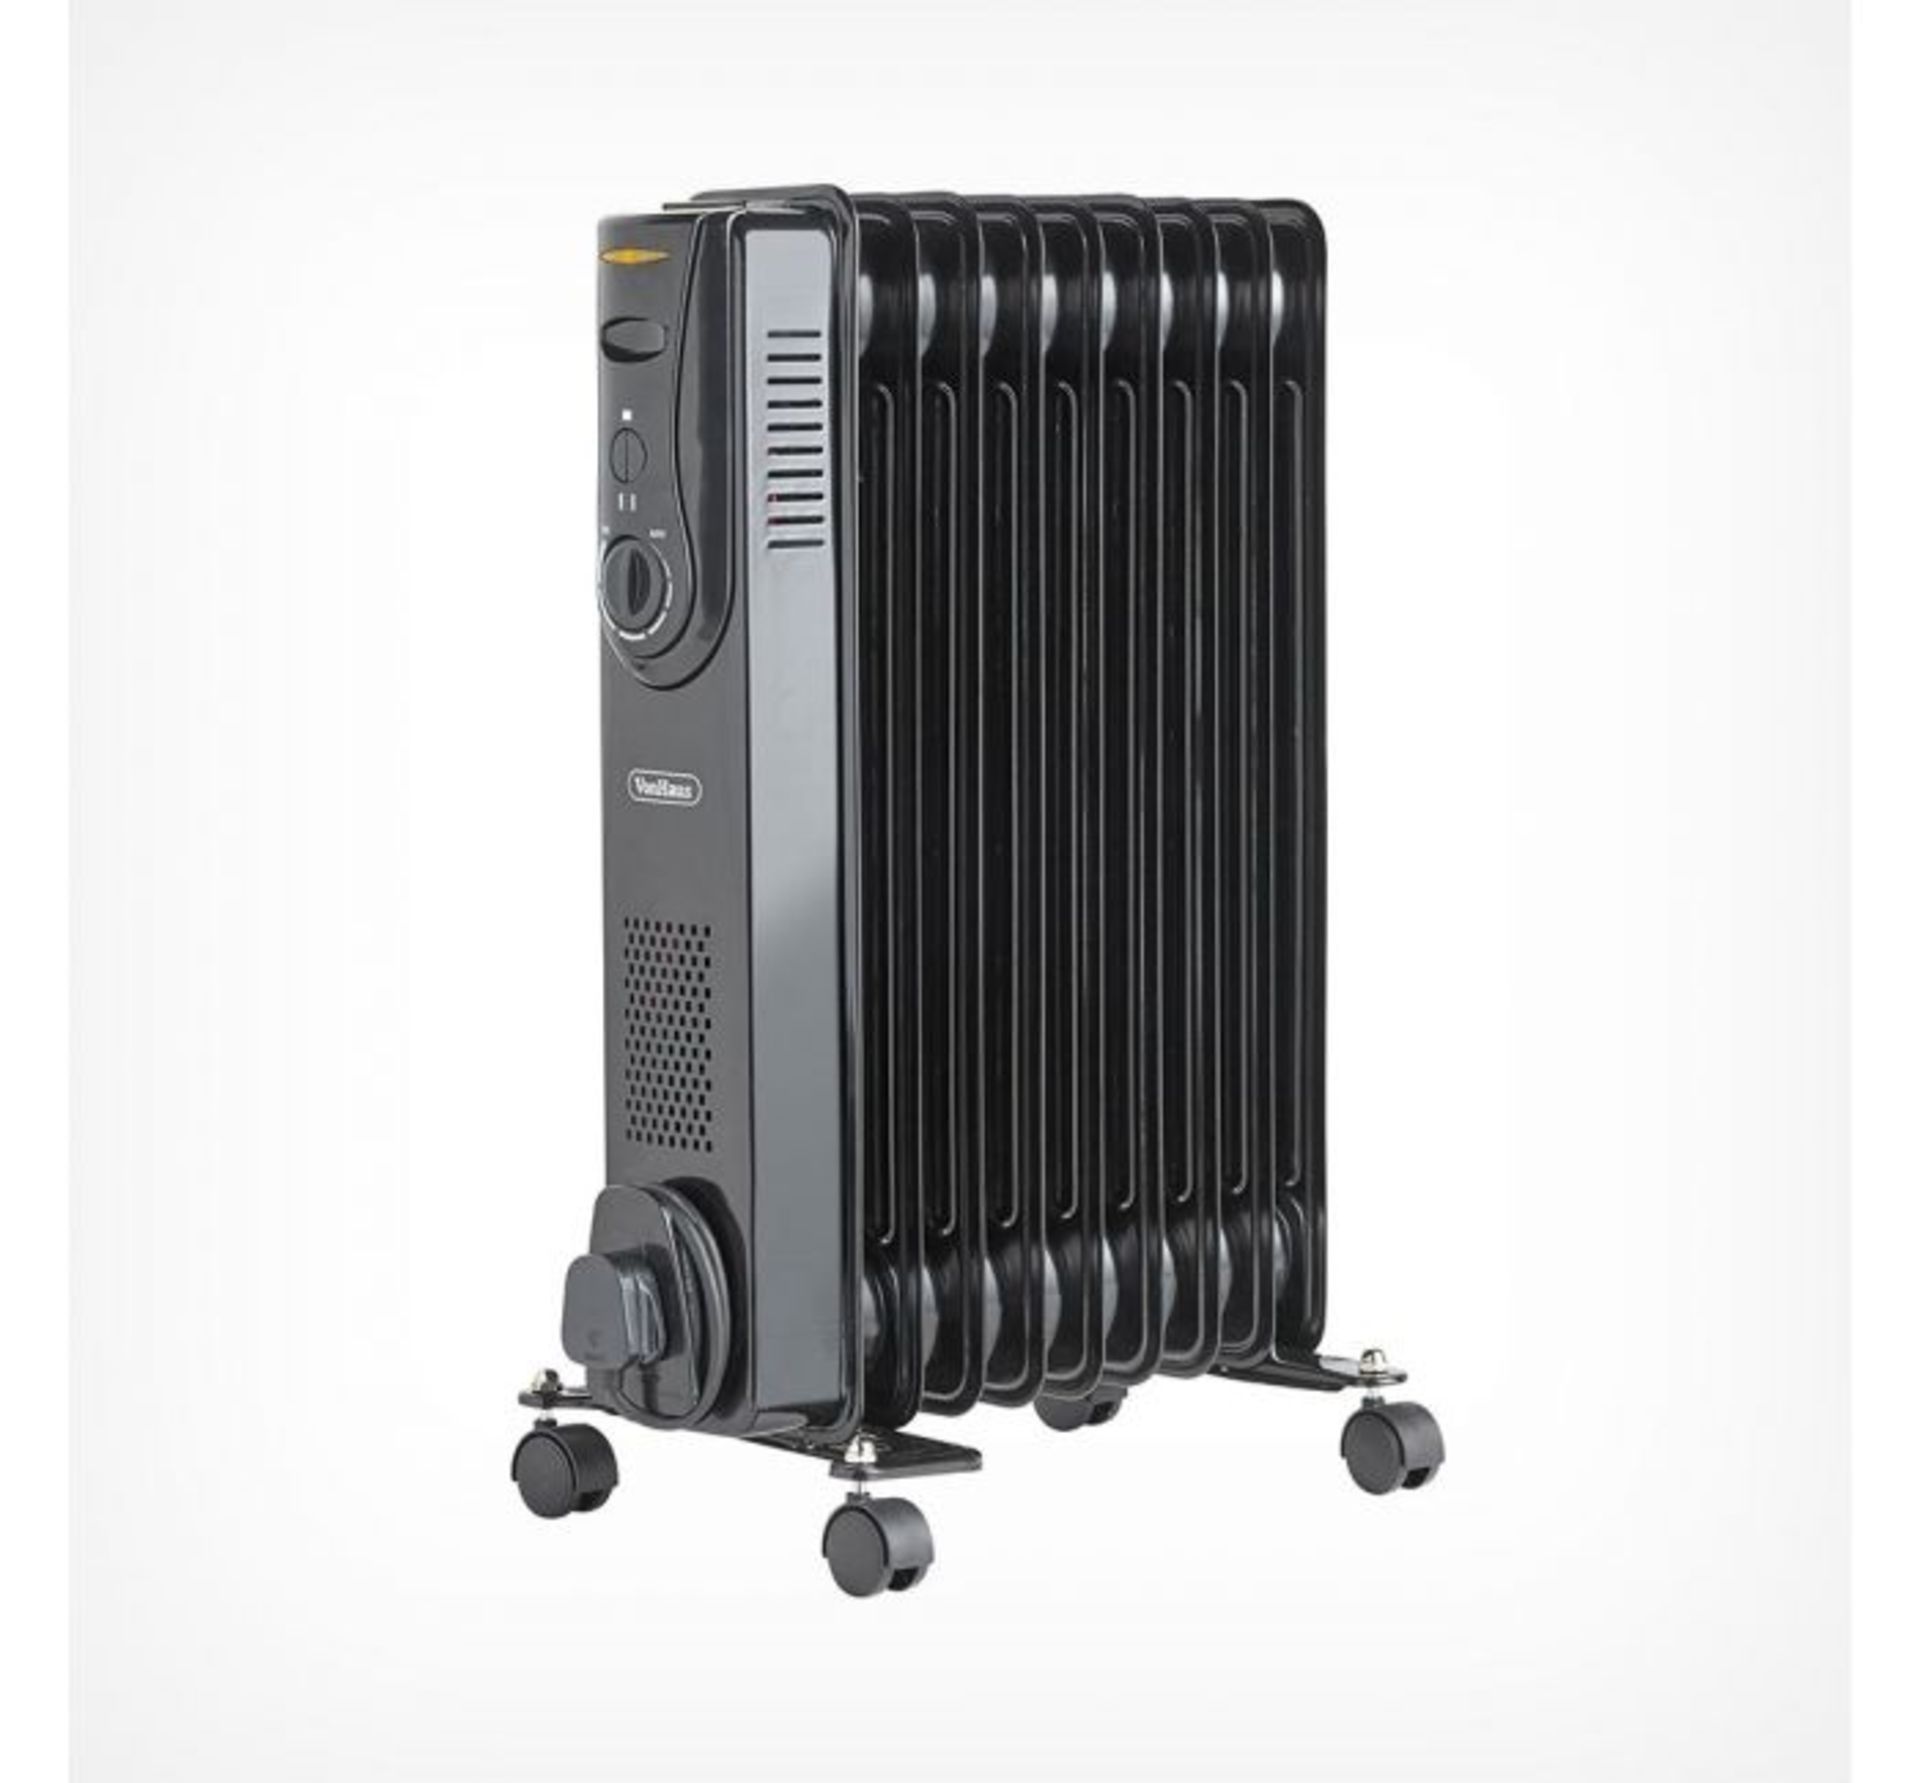 (JL77) 9 Fin 2000W Oil Filled Radiator - Black Powerful 2000W radiator with 9 oil-filled fins ... - Image 2 of 4